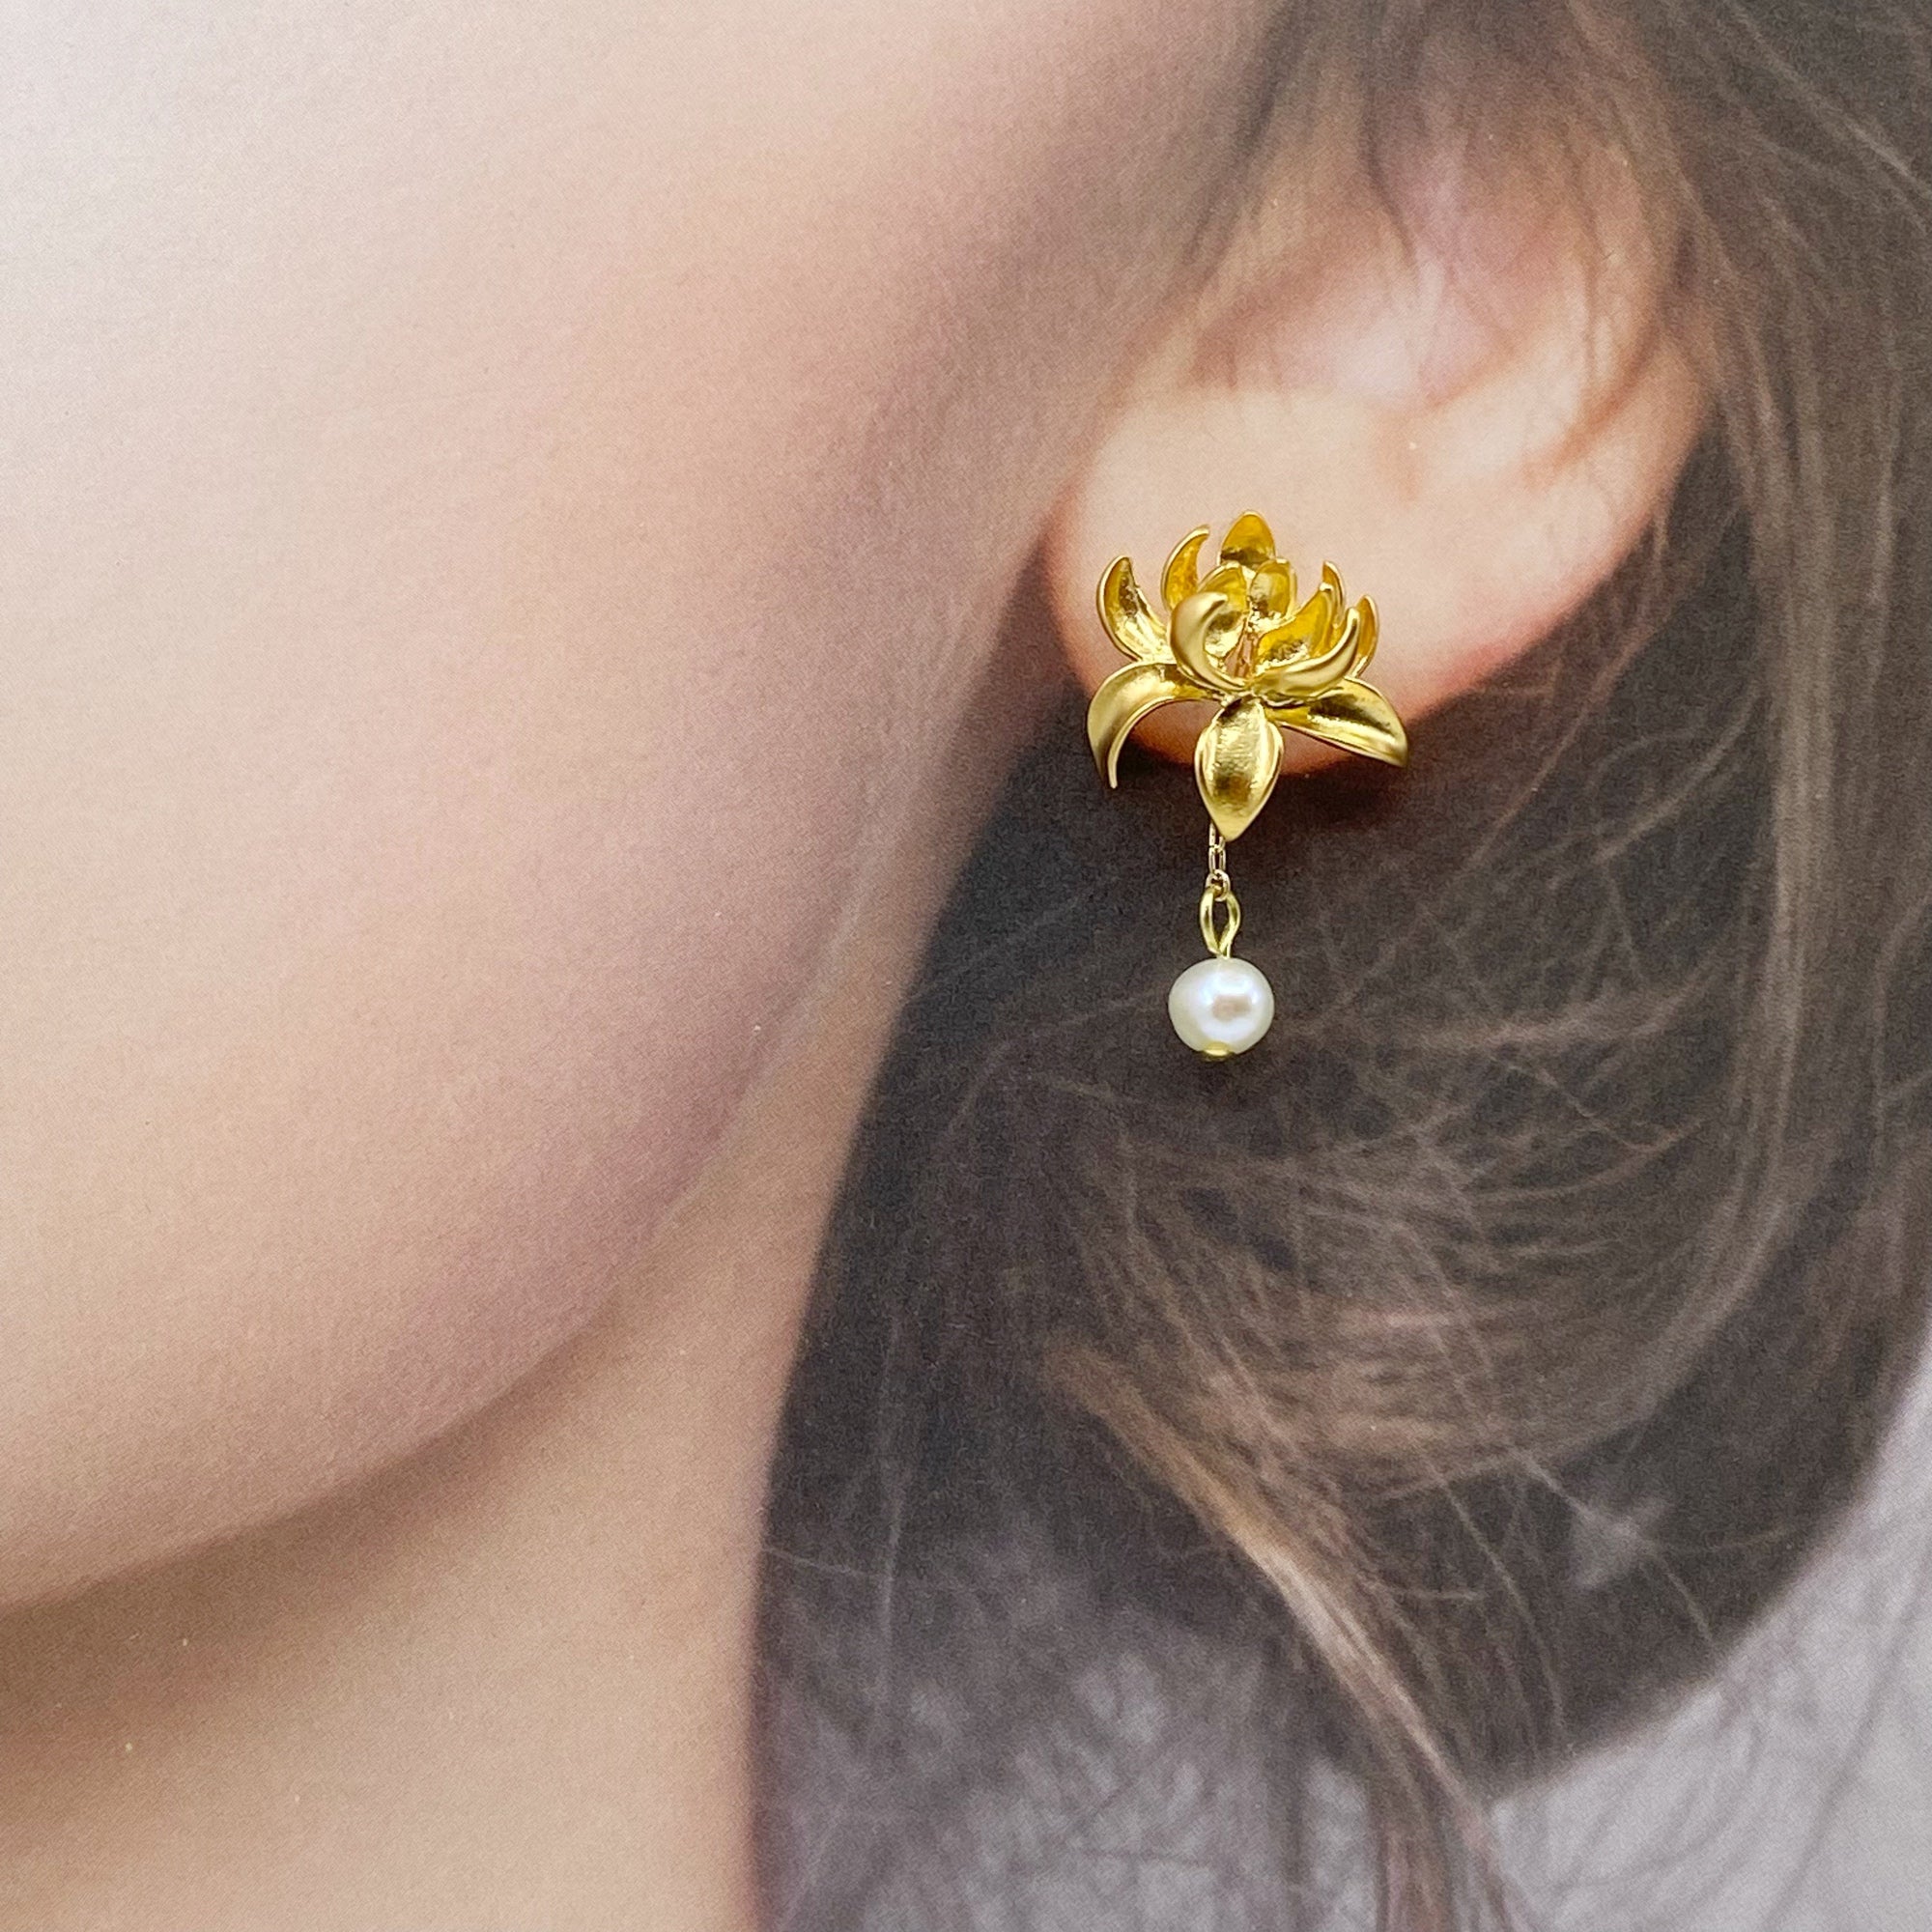 Korean Style Leaf Dangle Earrings With Gold Plating Flower Studs Perfect  Wedding Earrings Jhumkas Gift For Women From Rodneyvina, $10.47 | DHgate.Com